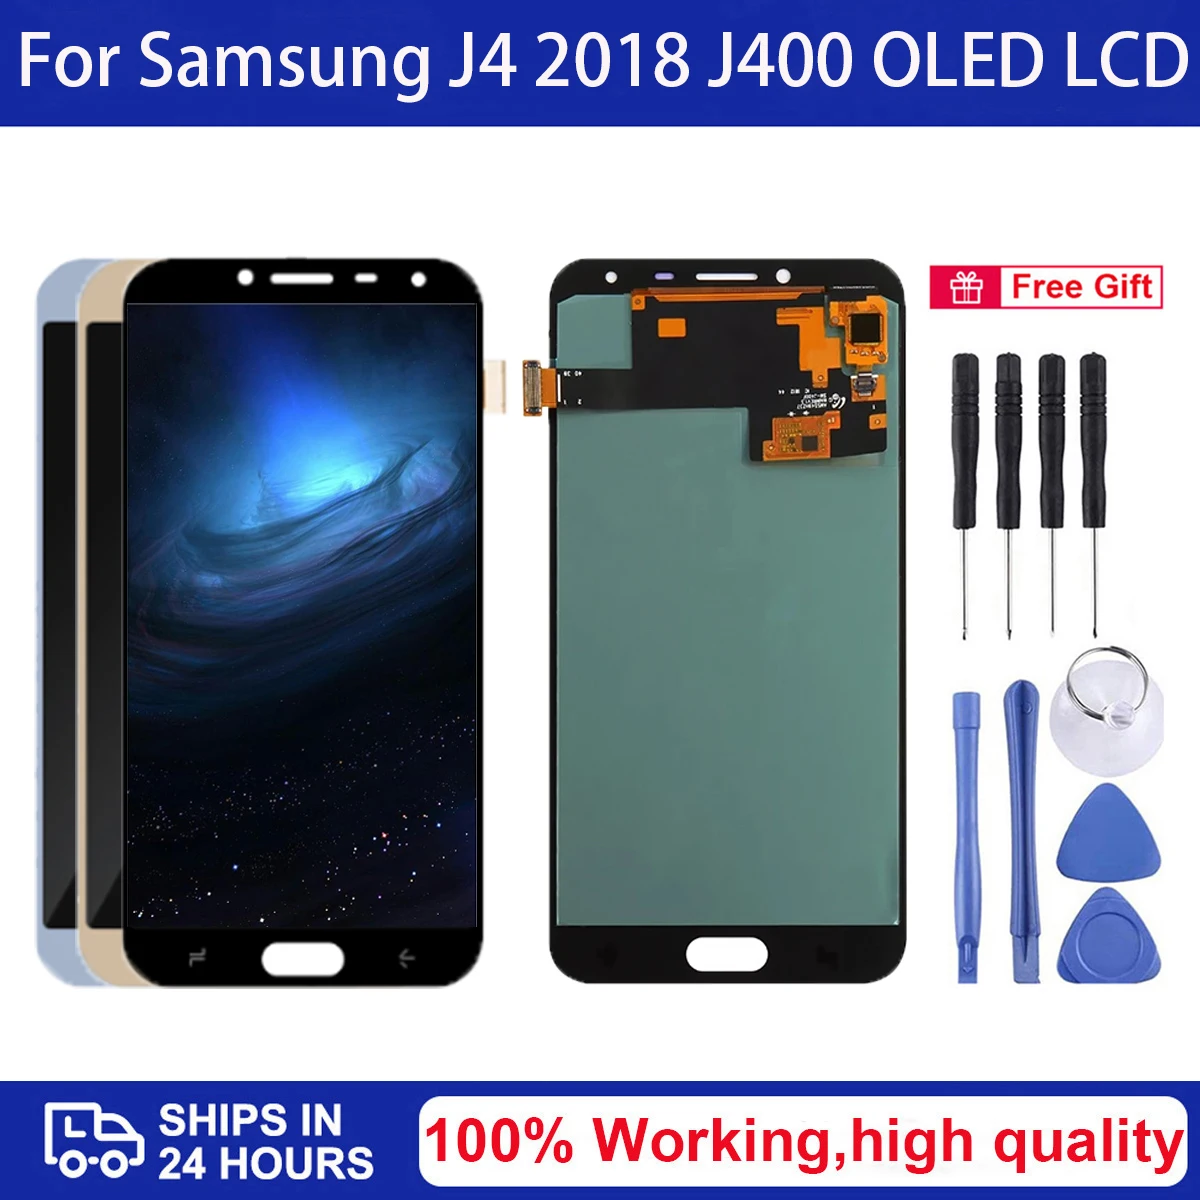 

5.5" AMOELD Display For Samsung Galaxy J4 2018 J400 SM-J400F J400H J400M J400G/DS j400 LCD with Touch Screen Digitizer Assembly